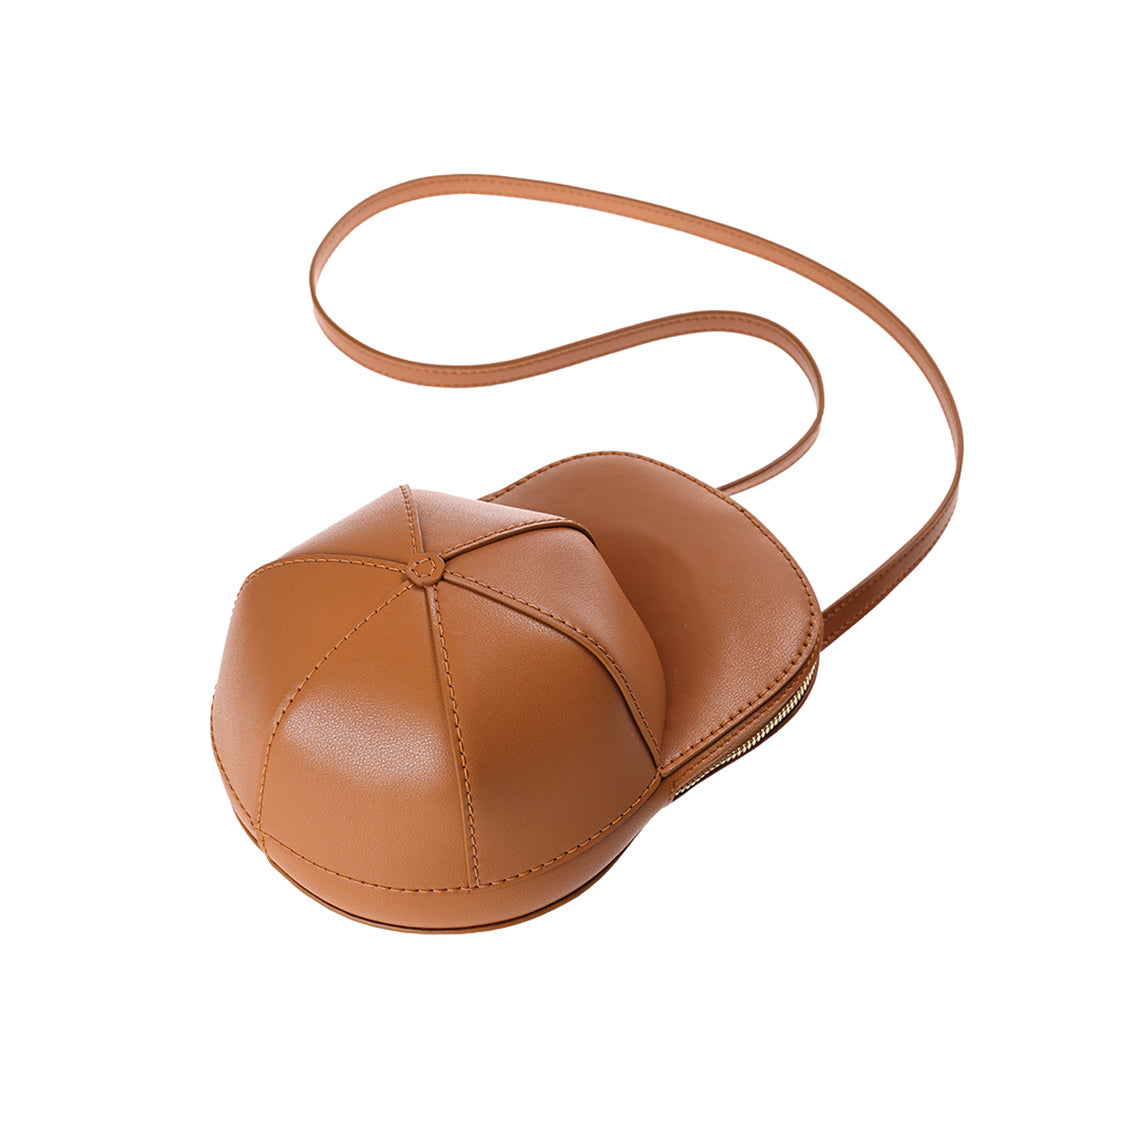 Brown leather bag kit in unique design | Baseball cap shaped leather crossbody bag